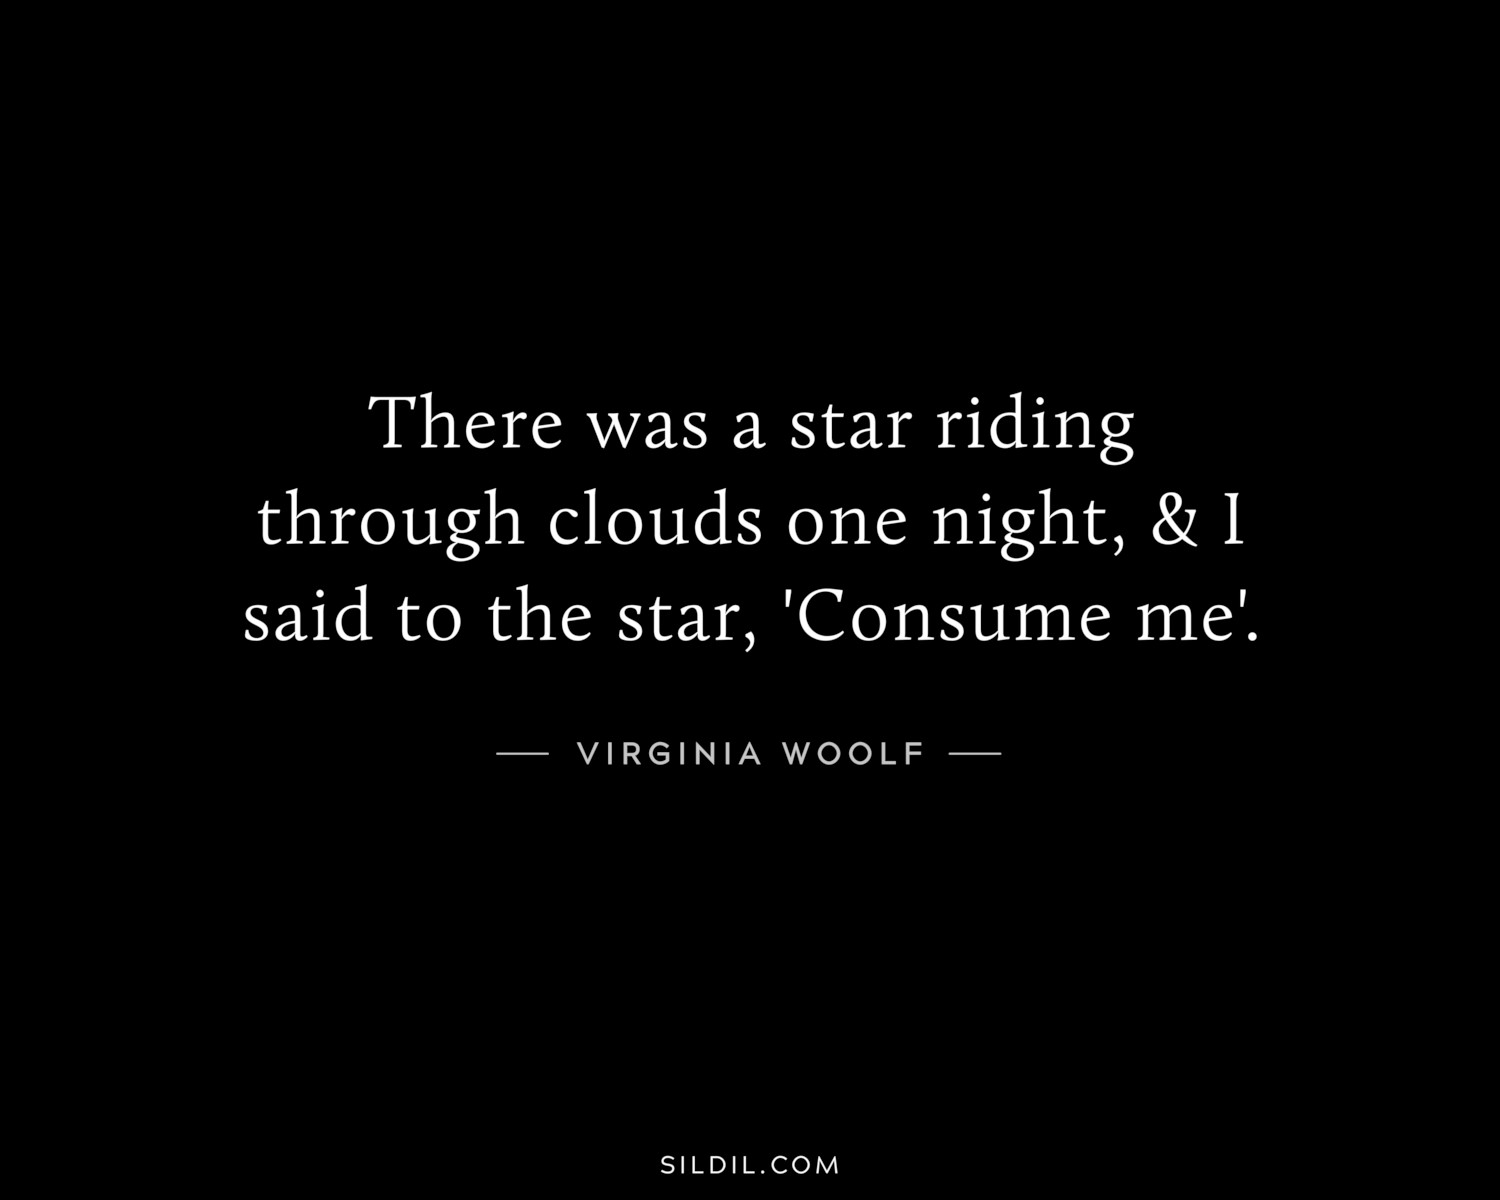 There was a star riding through clouds one night, & I said to the star, 'Consume me'.